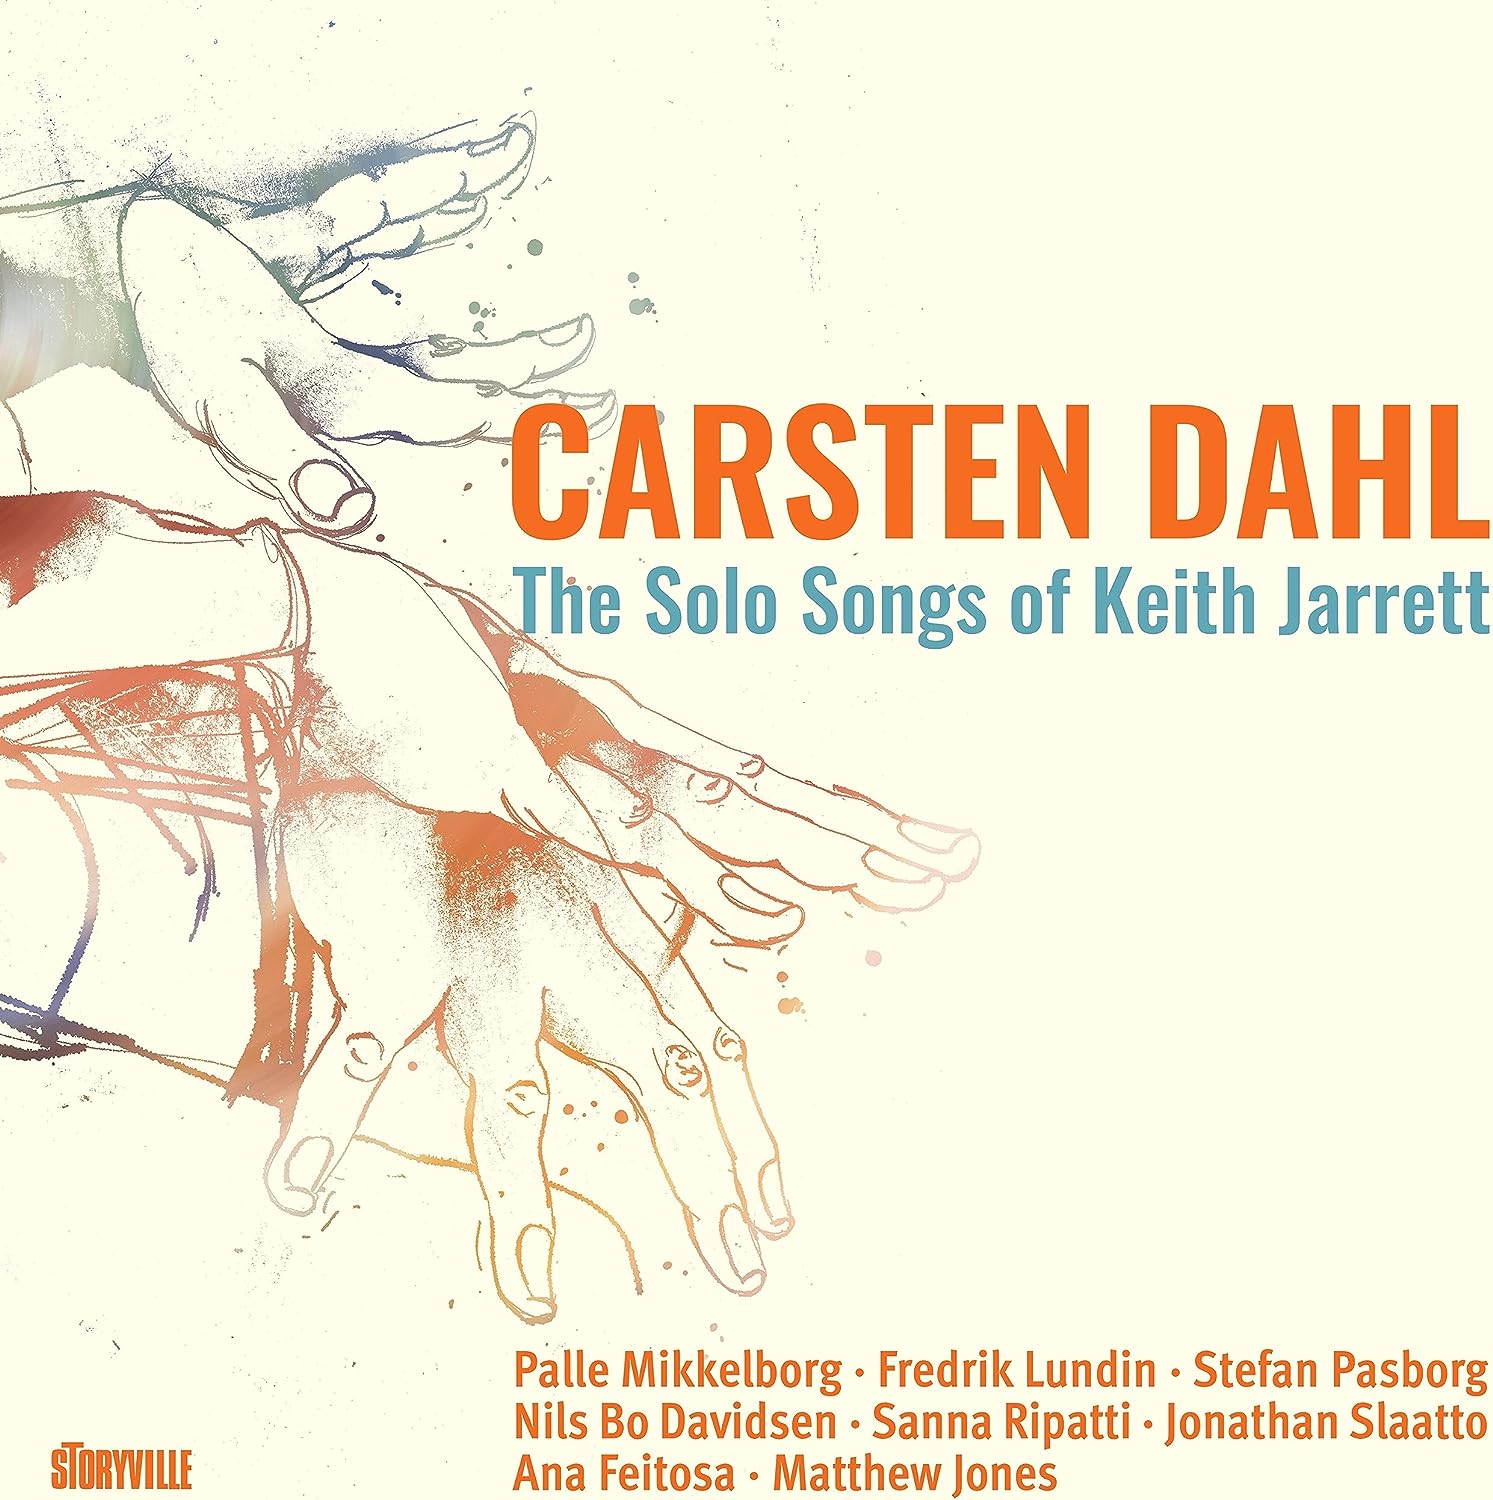 CARSTEN DAHL - The Solo Songs of Keith Jarrett cover 